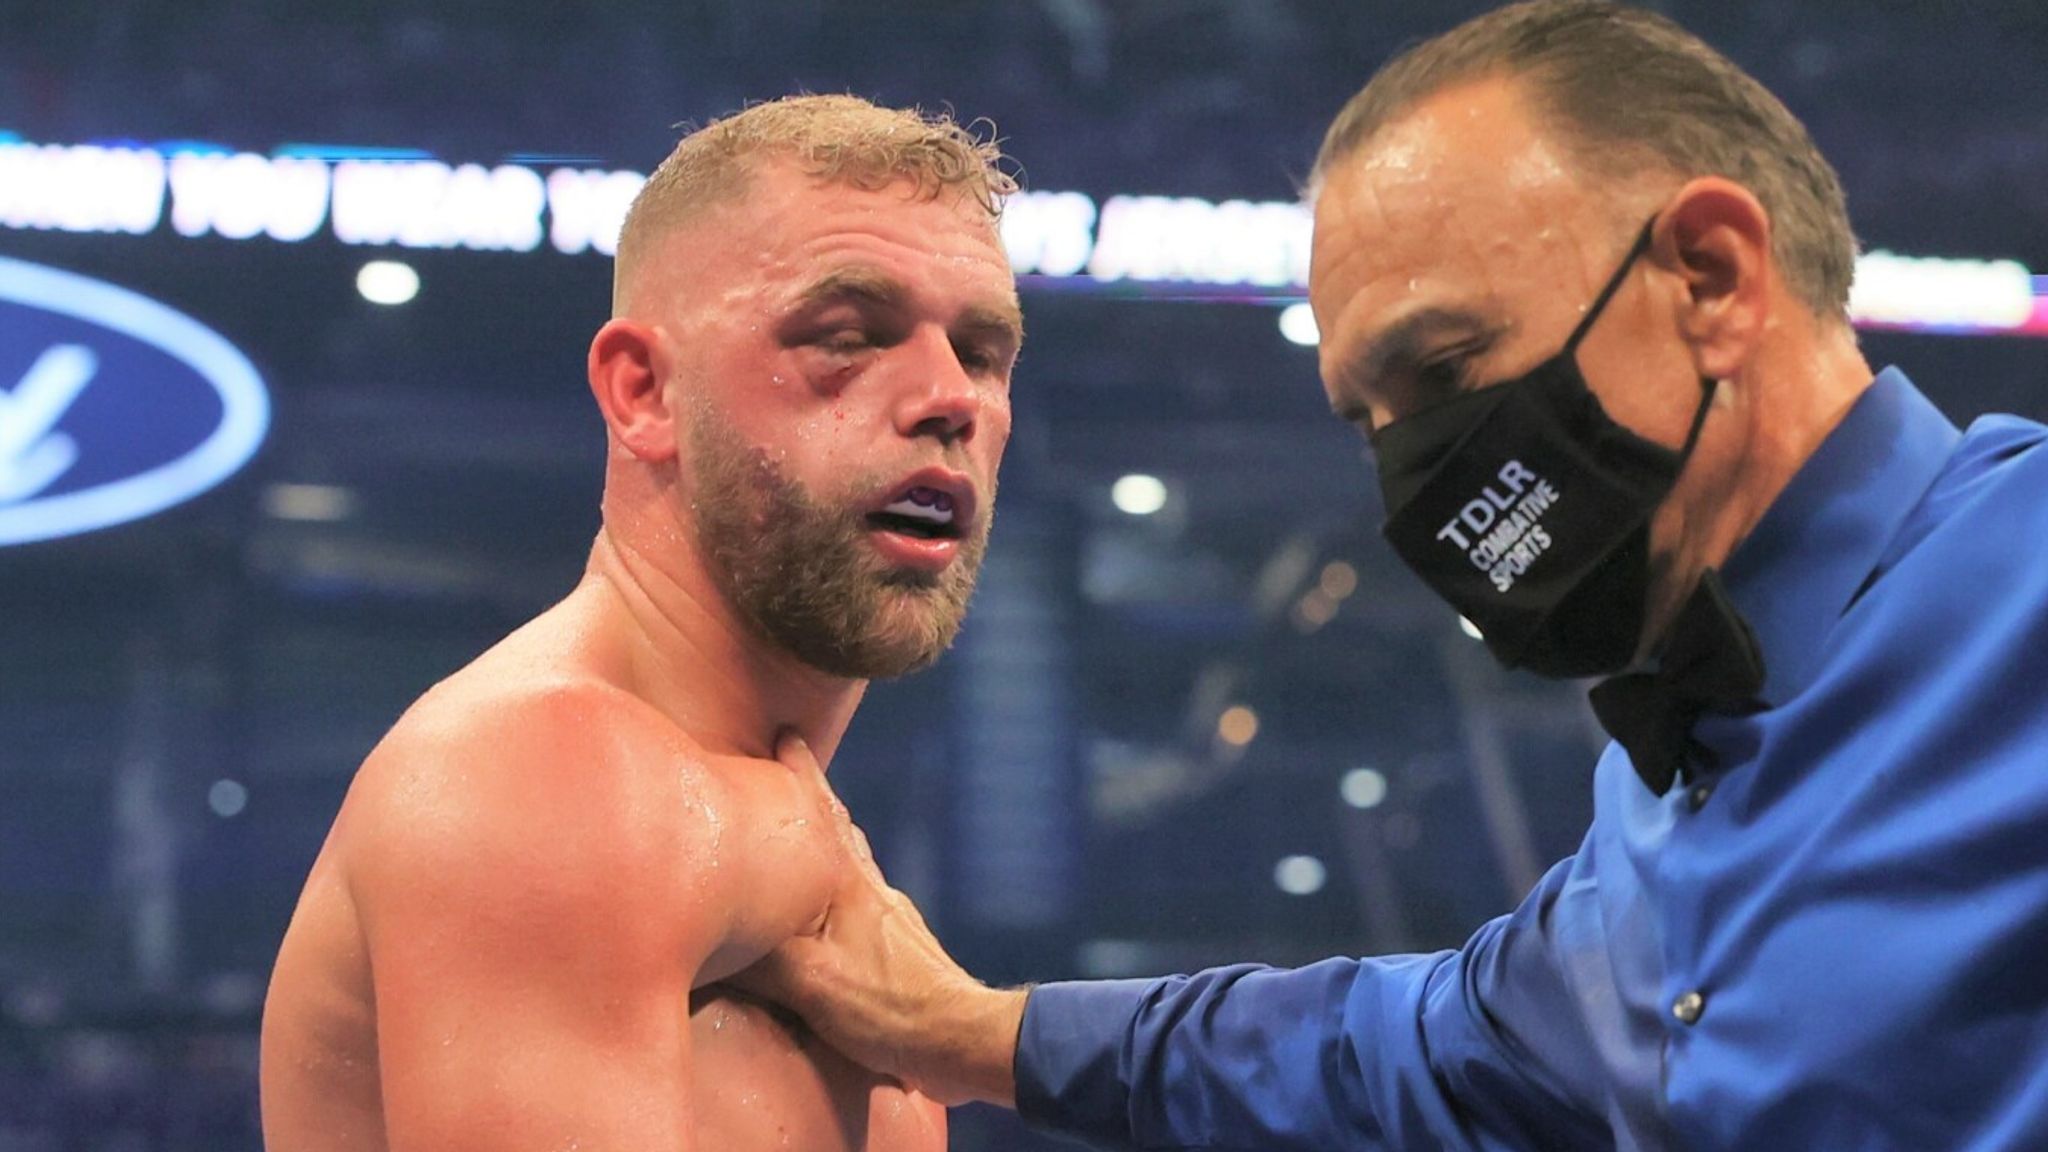 Billy Joe Saunders Return: 2 Years After Canelo Loss, Ex-Super Middleweight Champion Saunders's Potential Boxing Comeback Thrills the Fans- 'A Great Fighter'